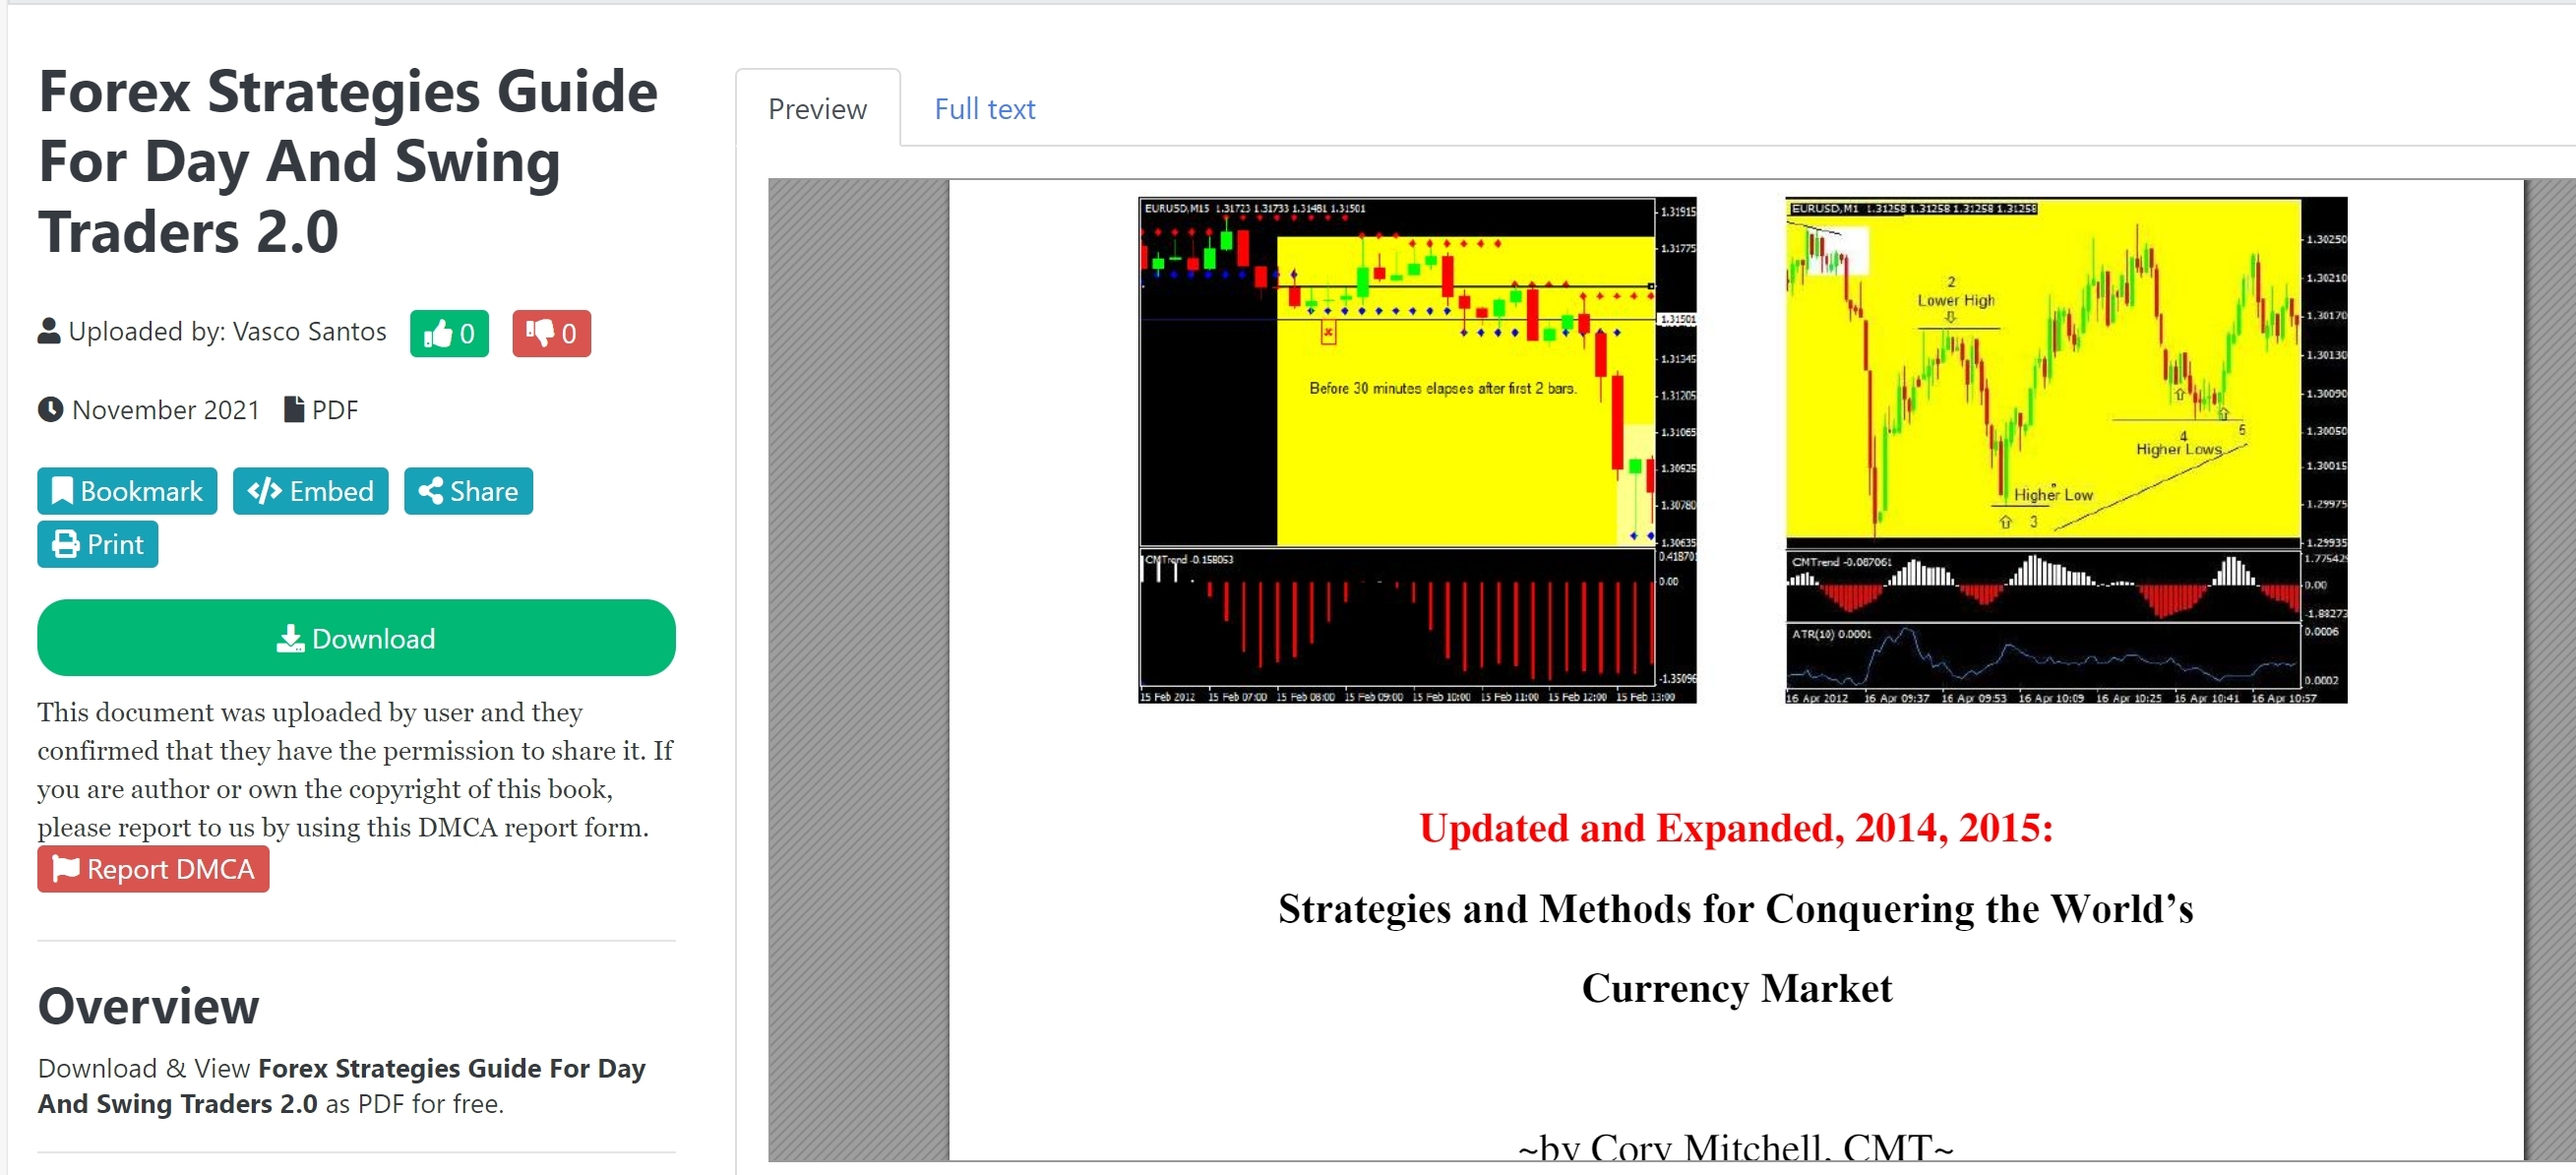 The Forex Strategies Guide for Day and Swing Traders 2.0